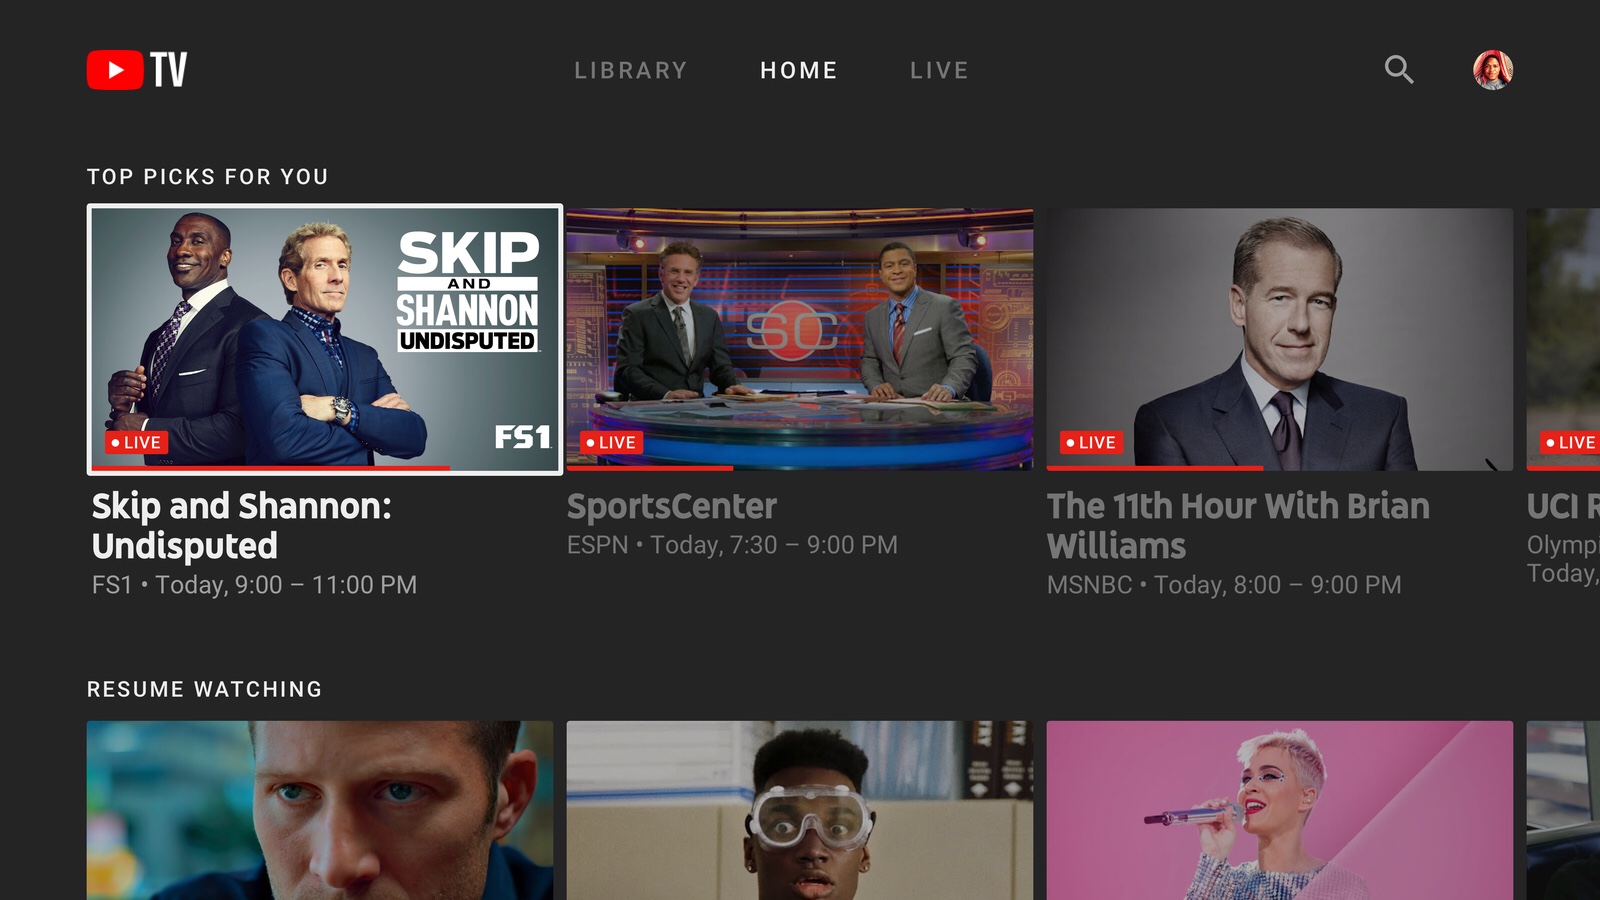 Starting tomorrow, YouTube TV’s price is increasing to $40 per month